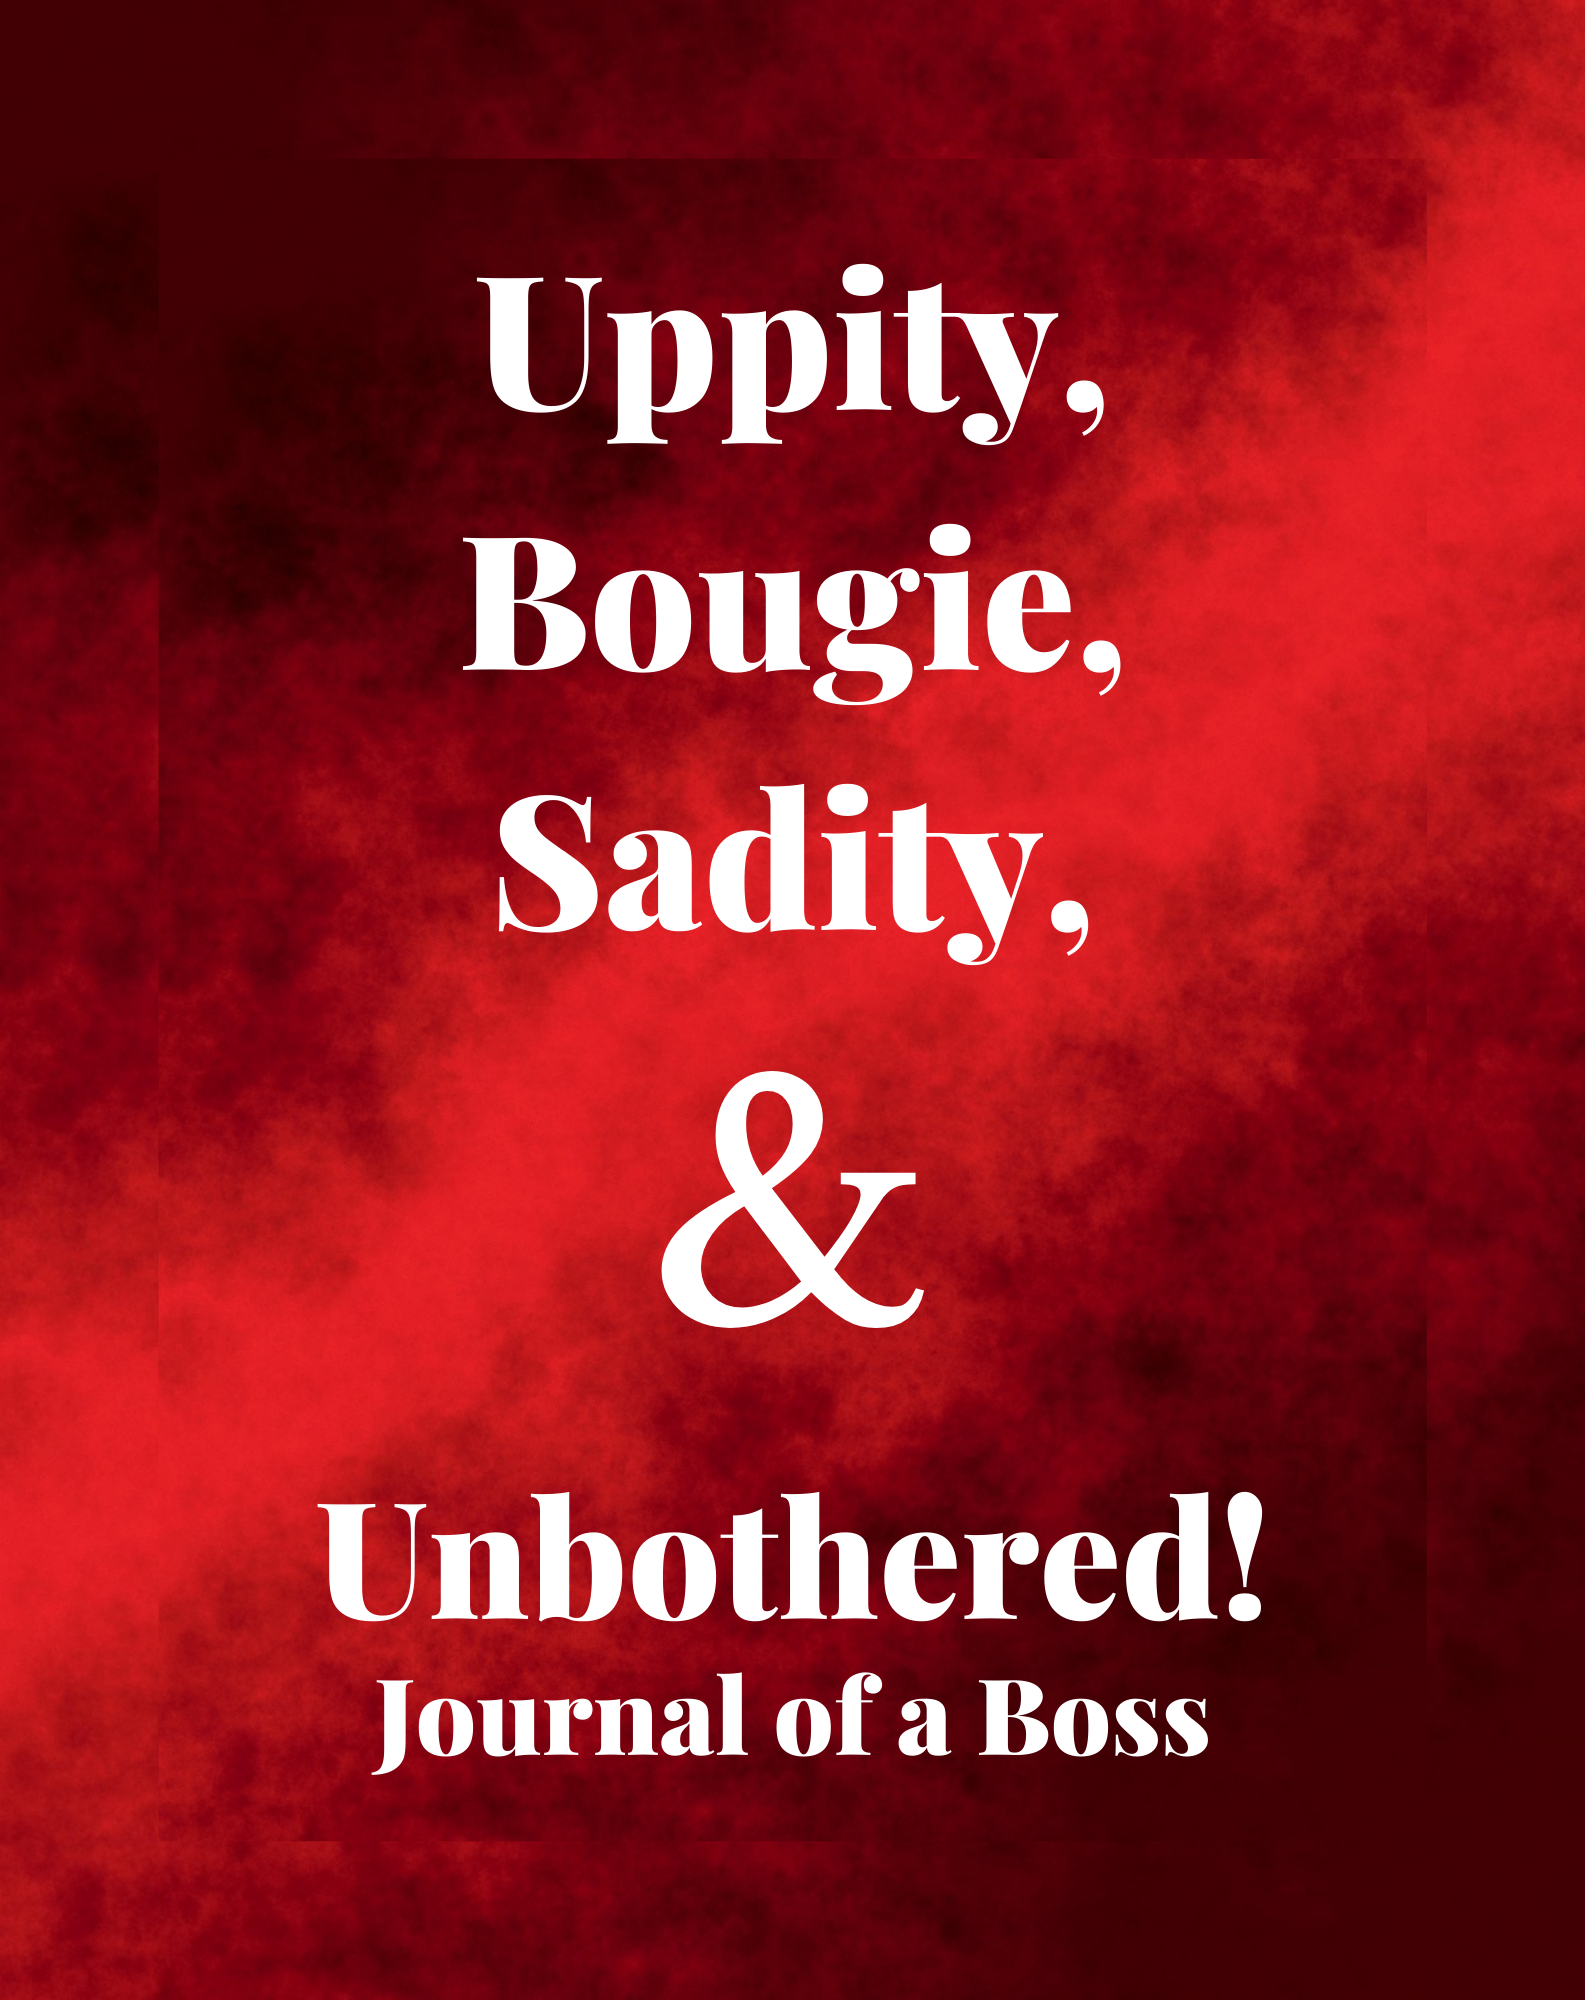 Uppity, Bougie, Sadity and Unbothered Journal